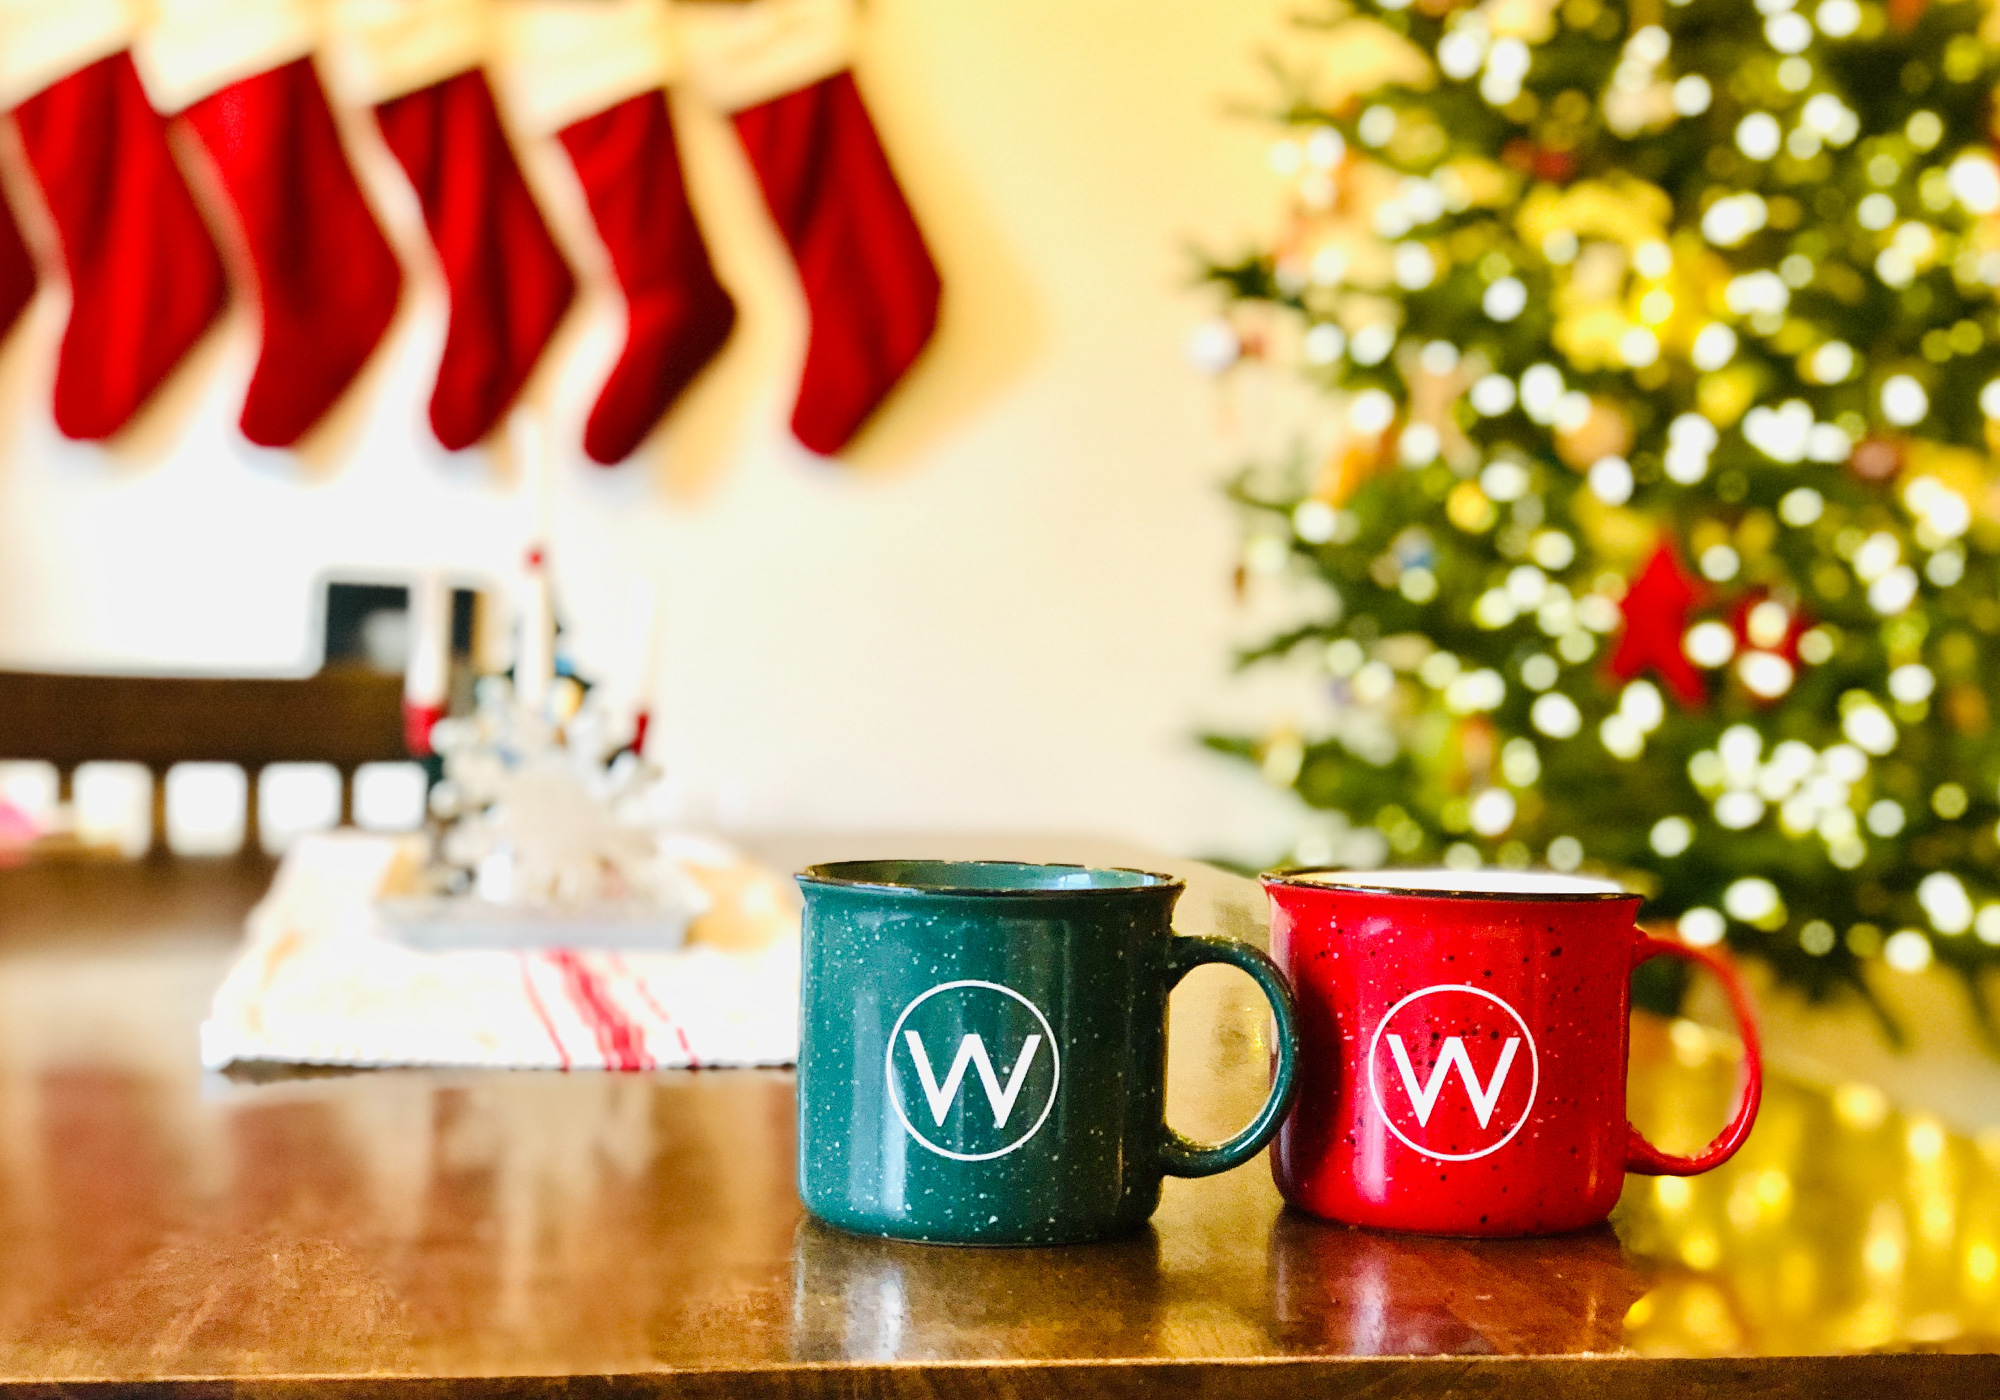 Stocking Stuffers For Him & Her Under $15 - Coffee With Summer